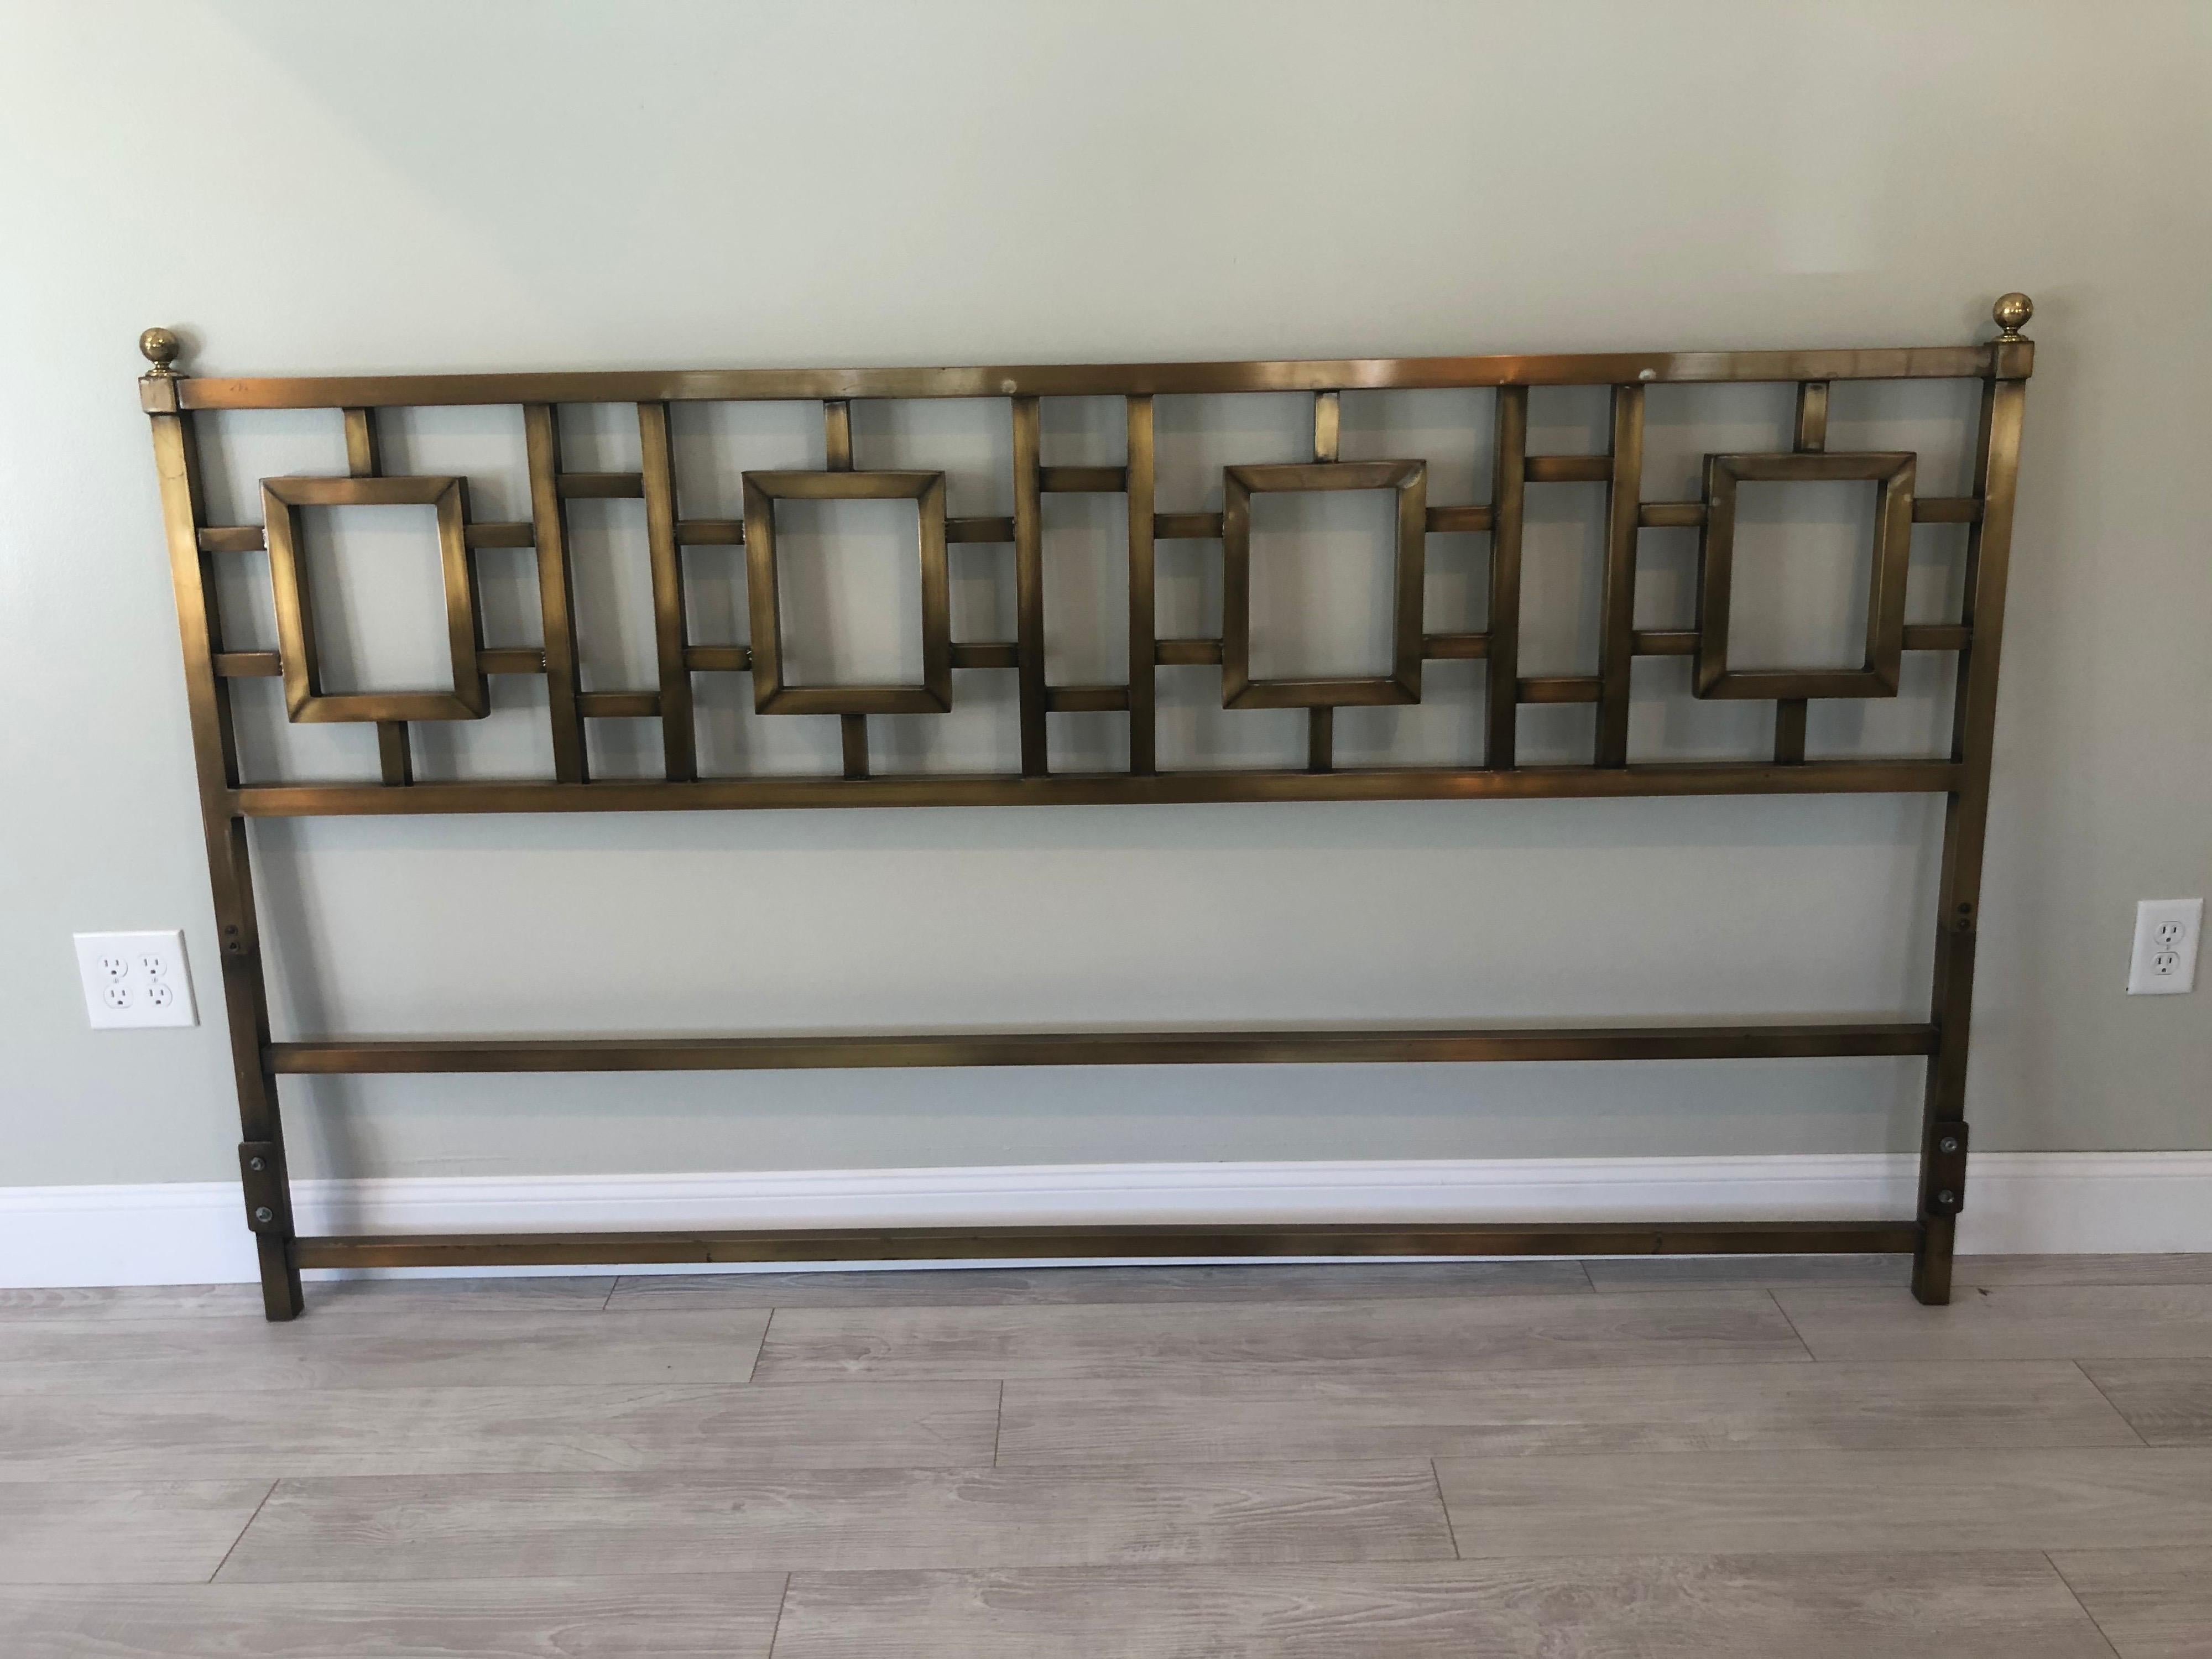 Mastercraft Greek key brass king size headboard. Heavy and sturdy but very elegant and sophisticated.